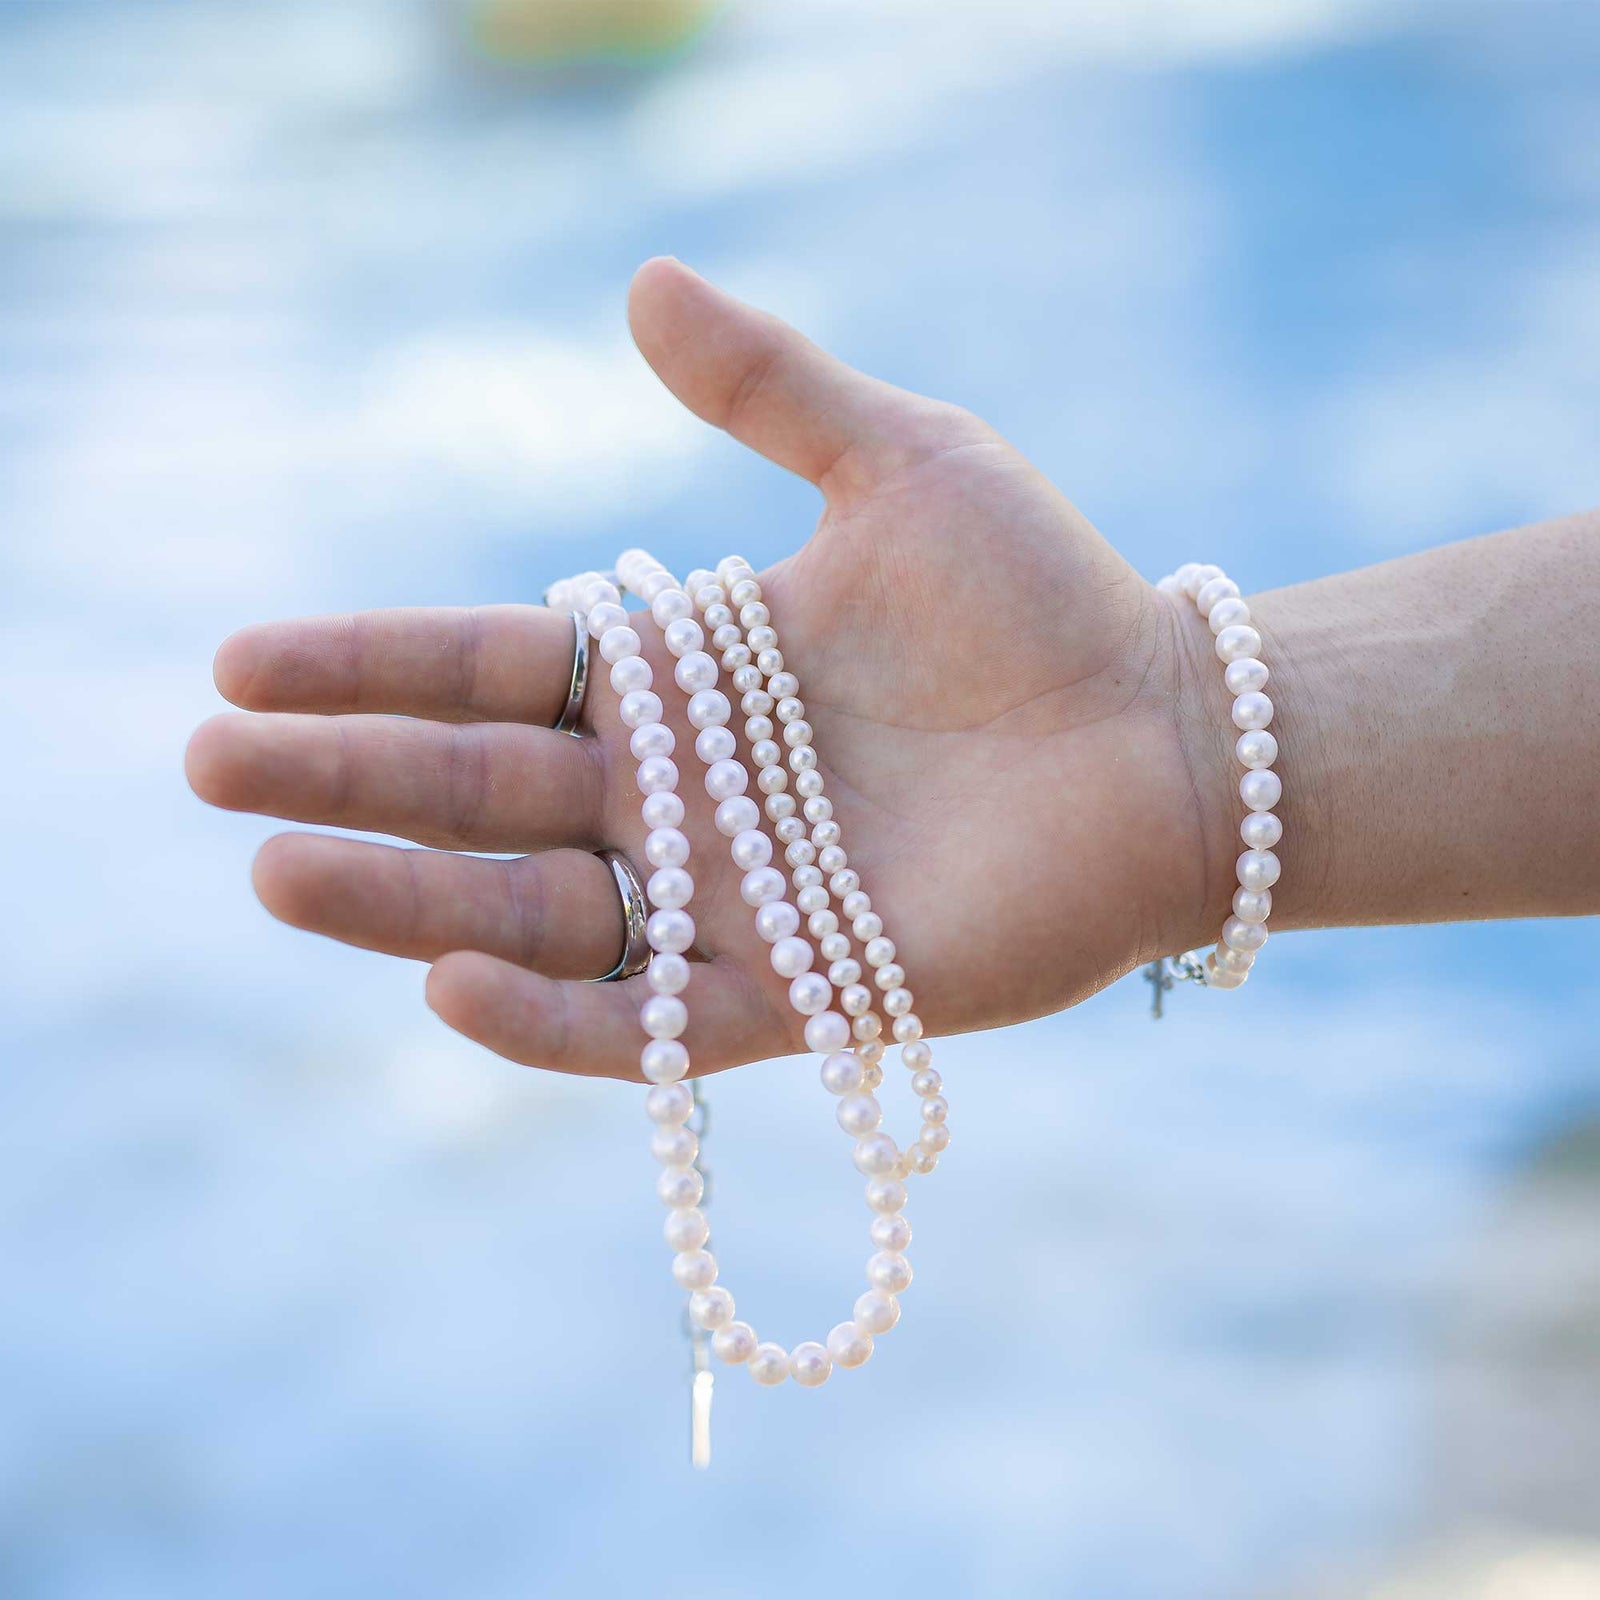 Buy the Pearl Jewelry Collection  Philippines  AMAMI  AMAMI Filipino  Jewelry